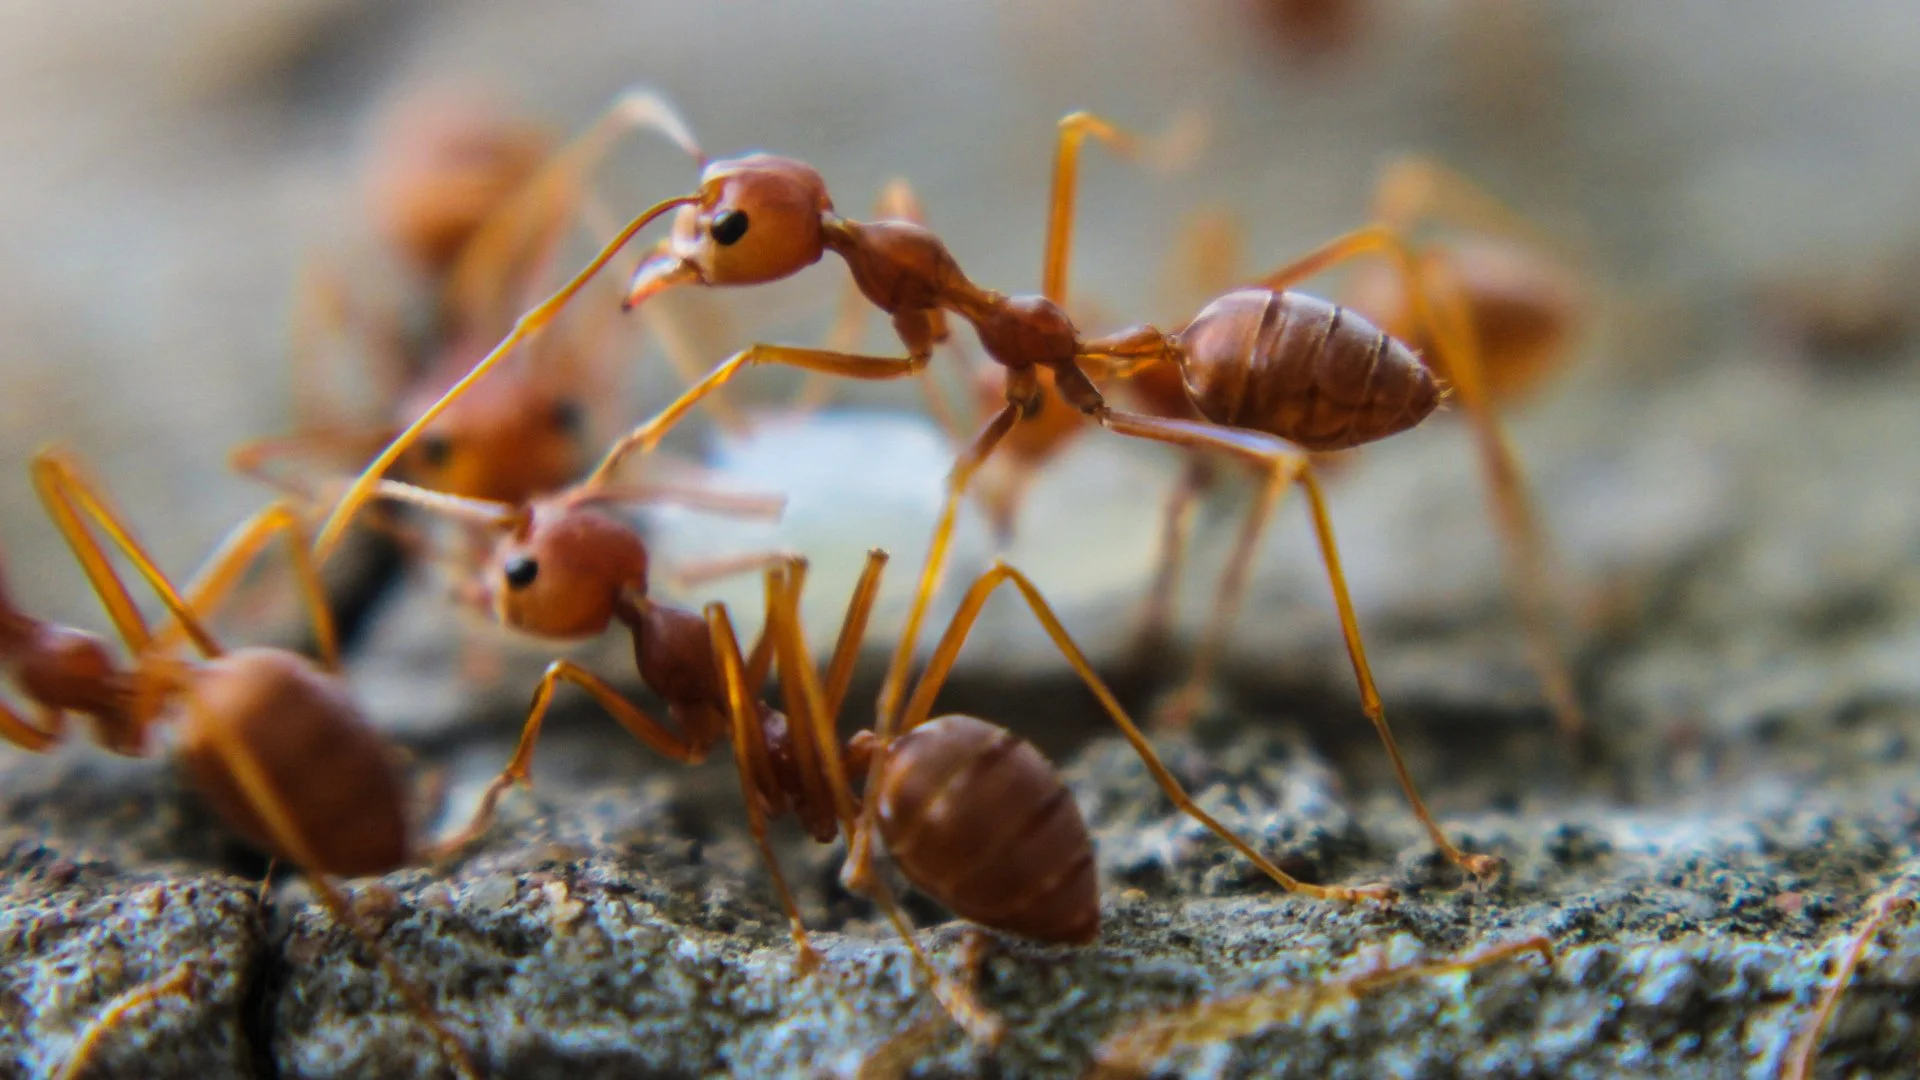 How to Tell Fire Ants From Other Ants